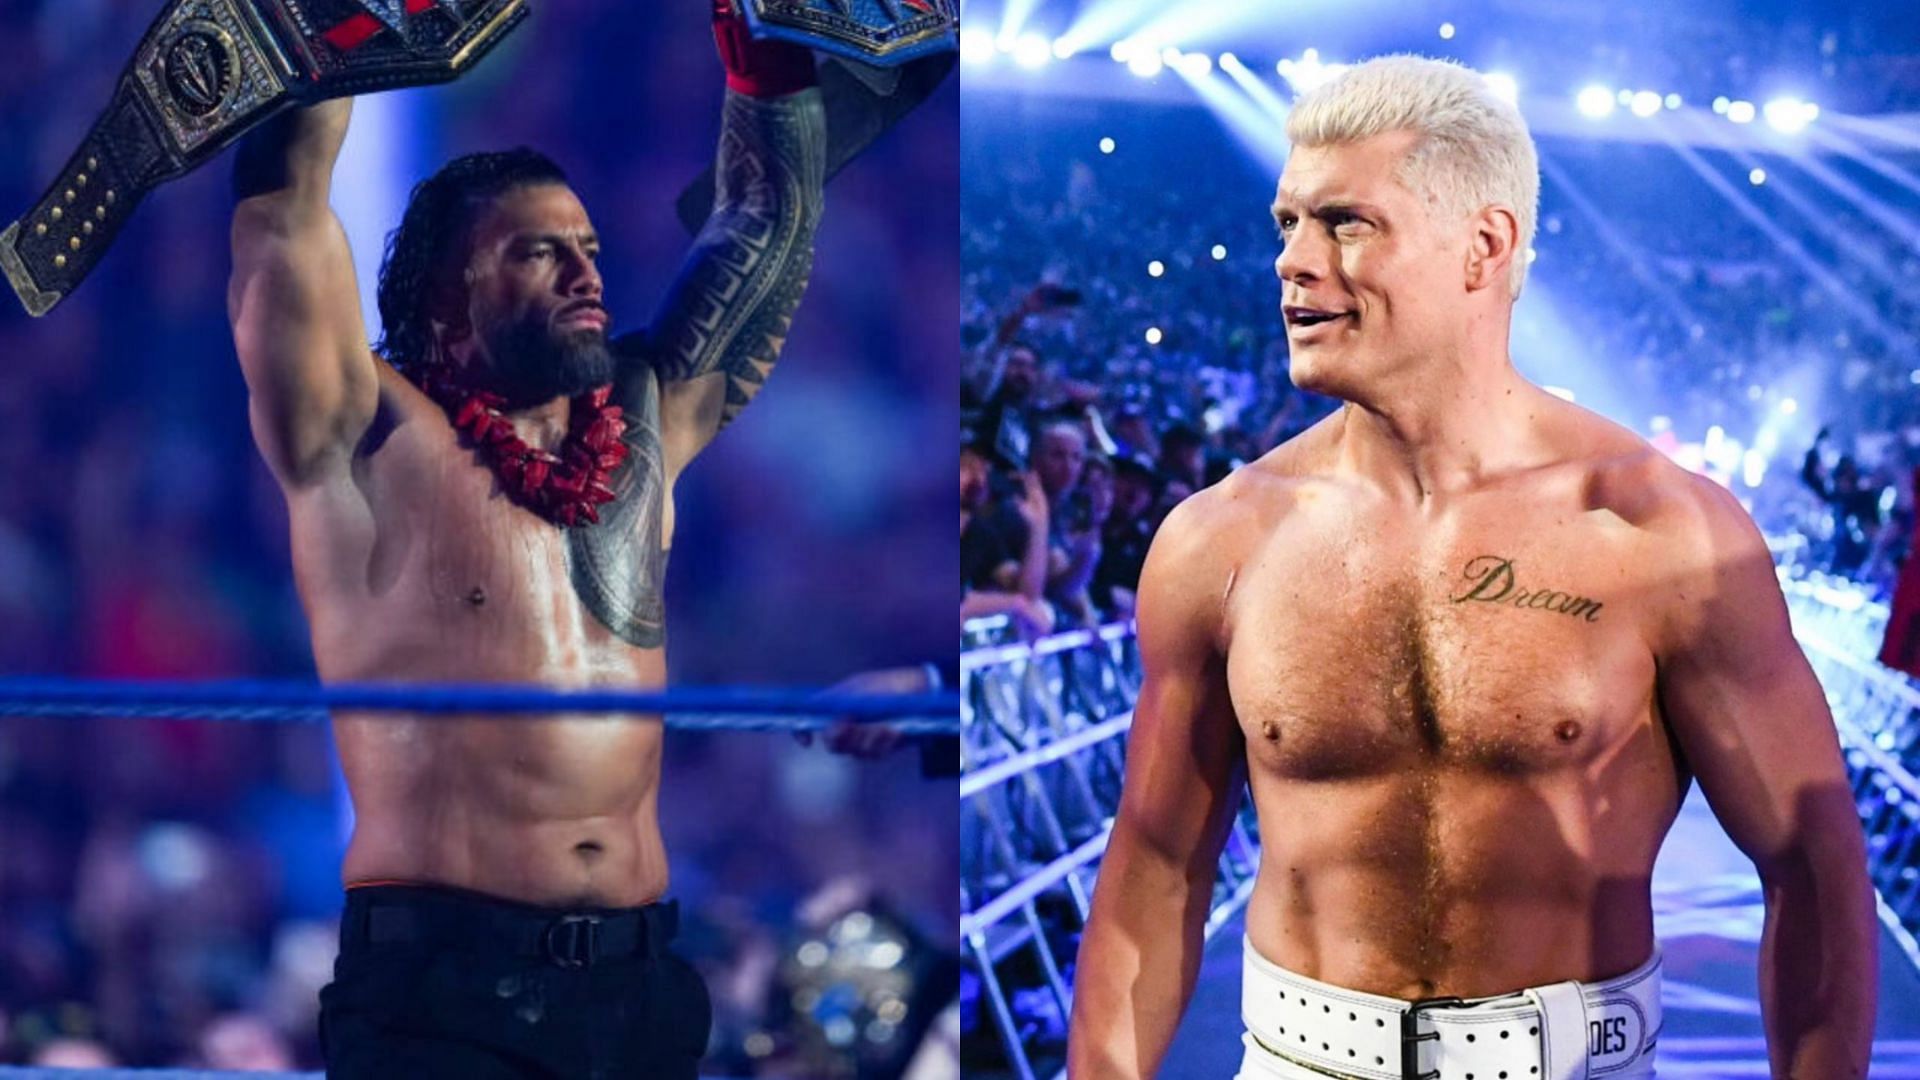 The Undisputed WWE Universal Champion Roman Reigns (left) and Cody Rhodes (right)